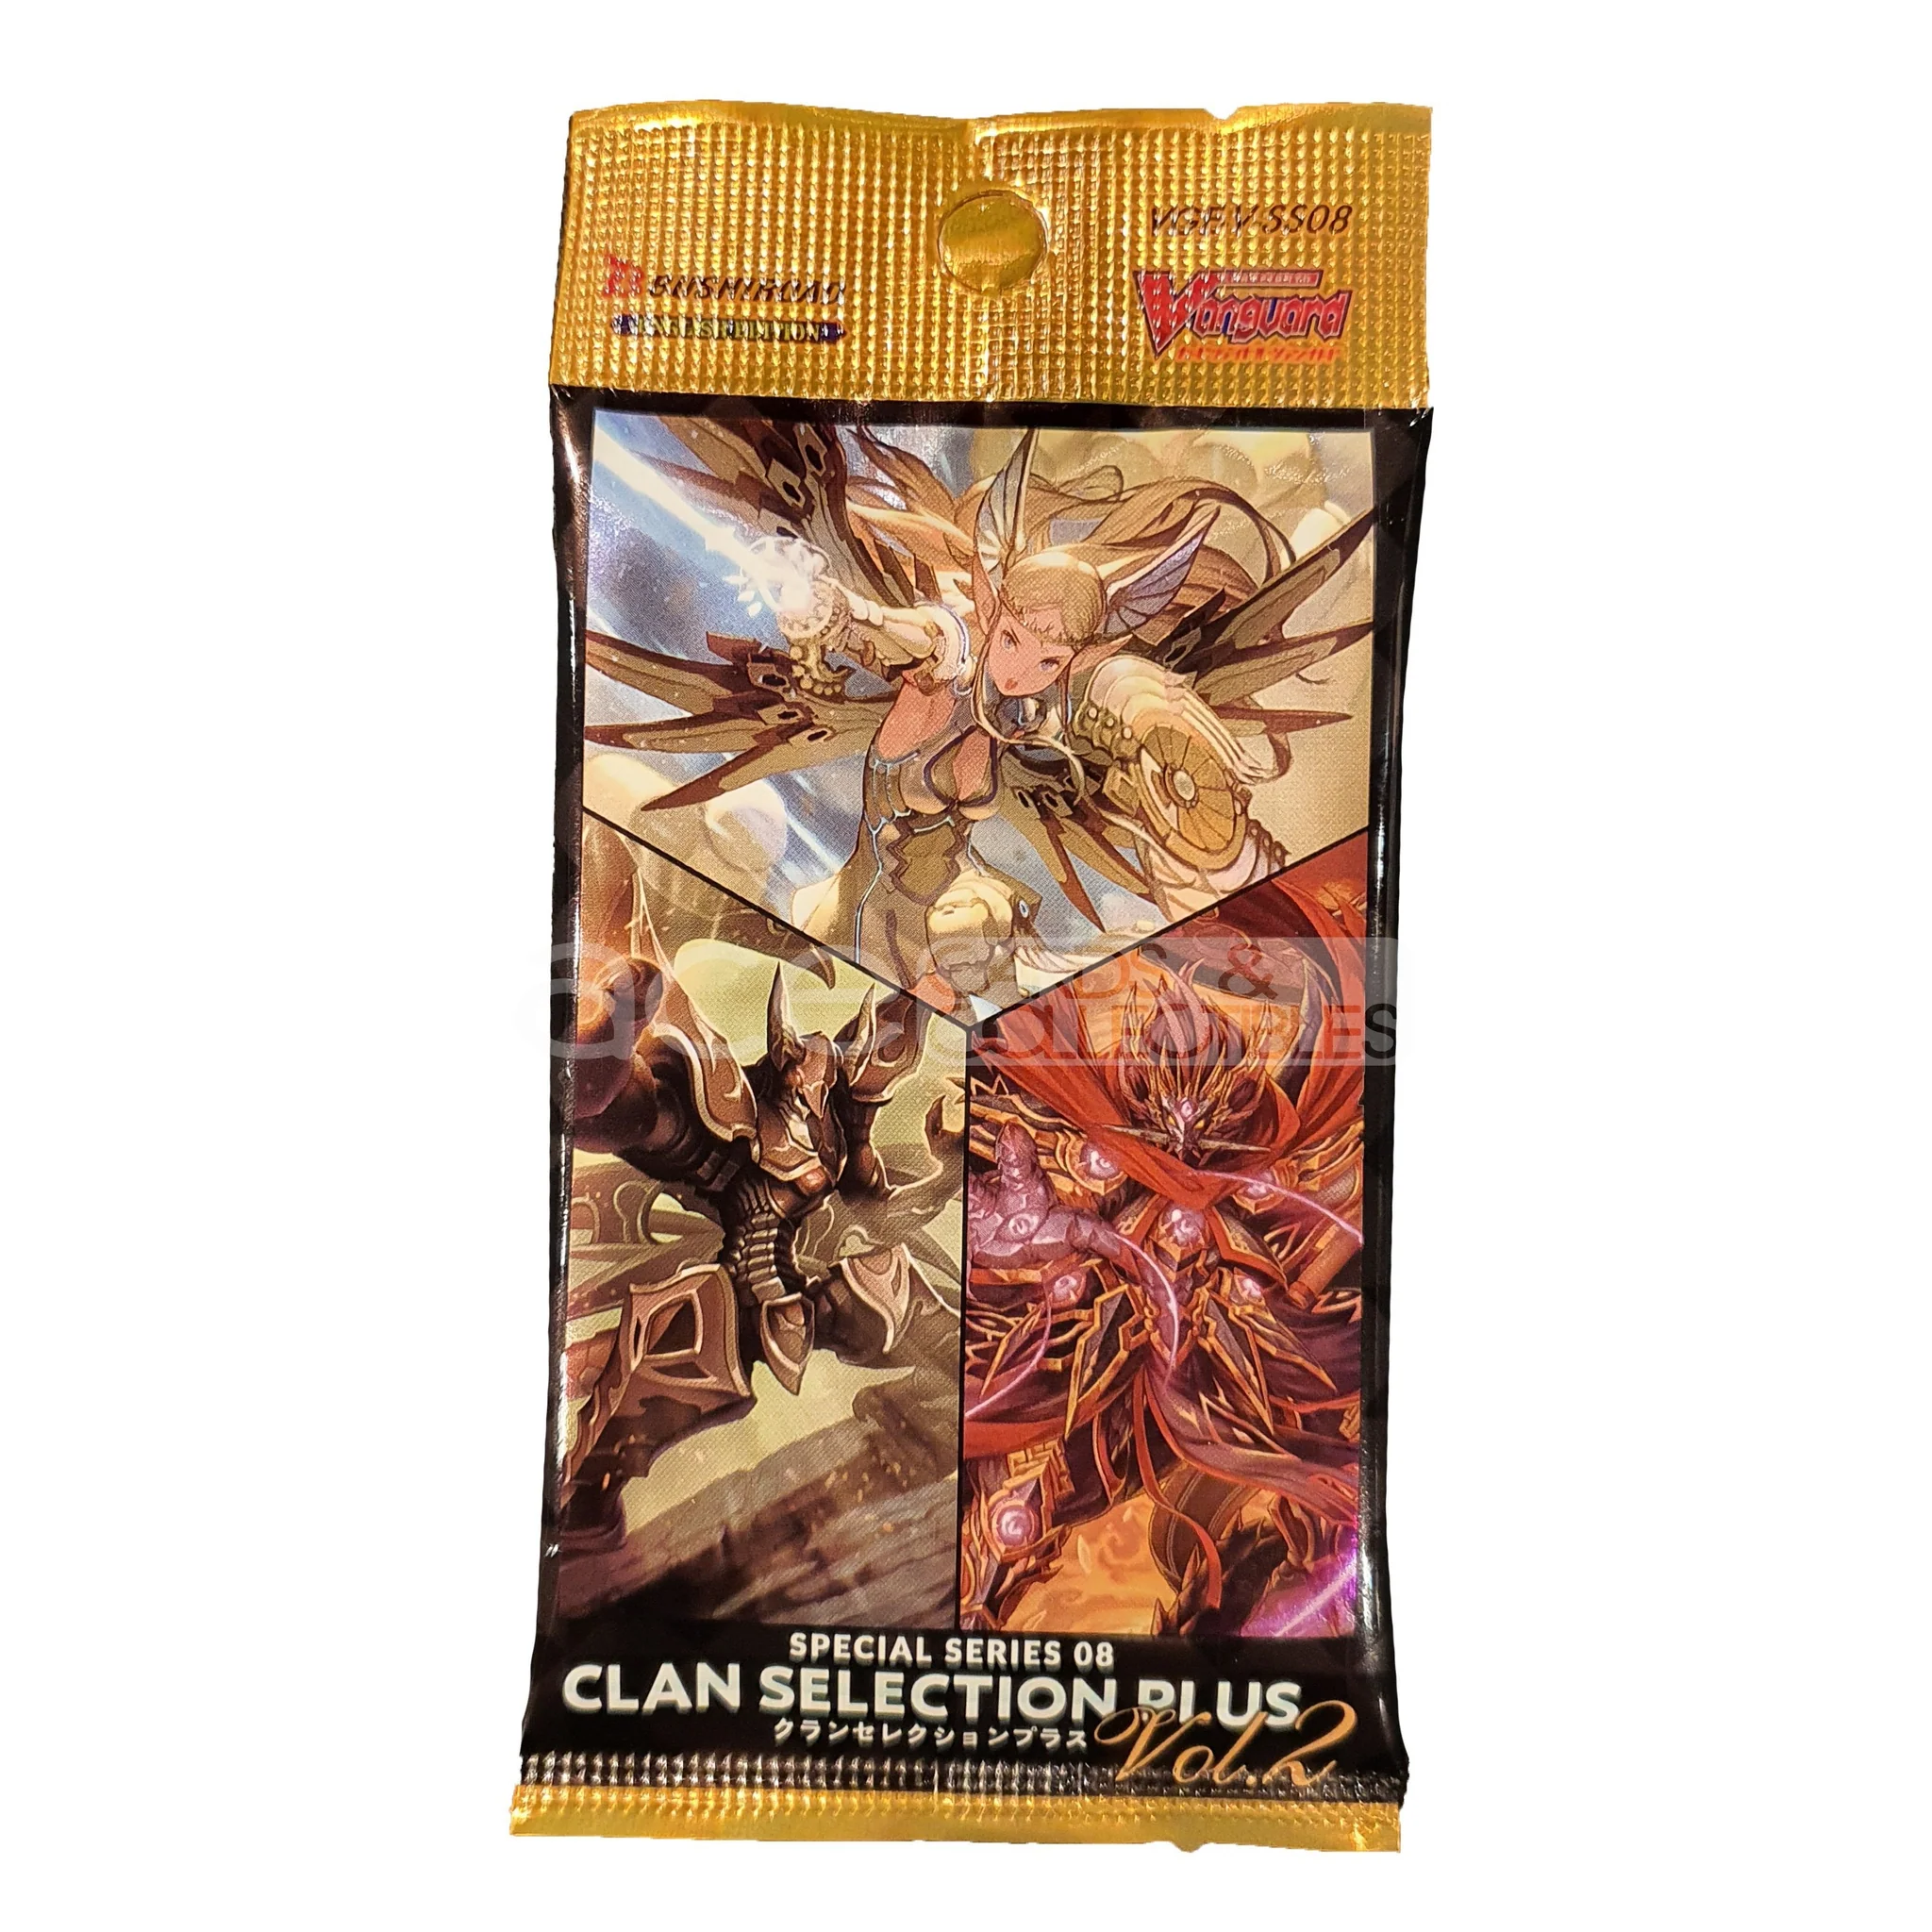 Cardfight Vanguard: Clan Selection Plus - Vol 2 Booster Pack 